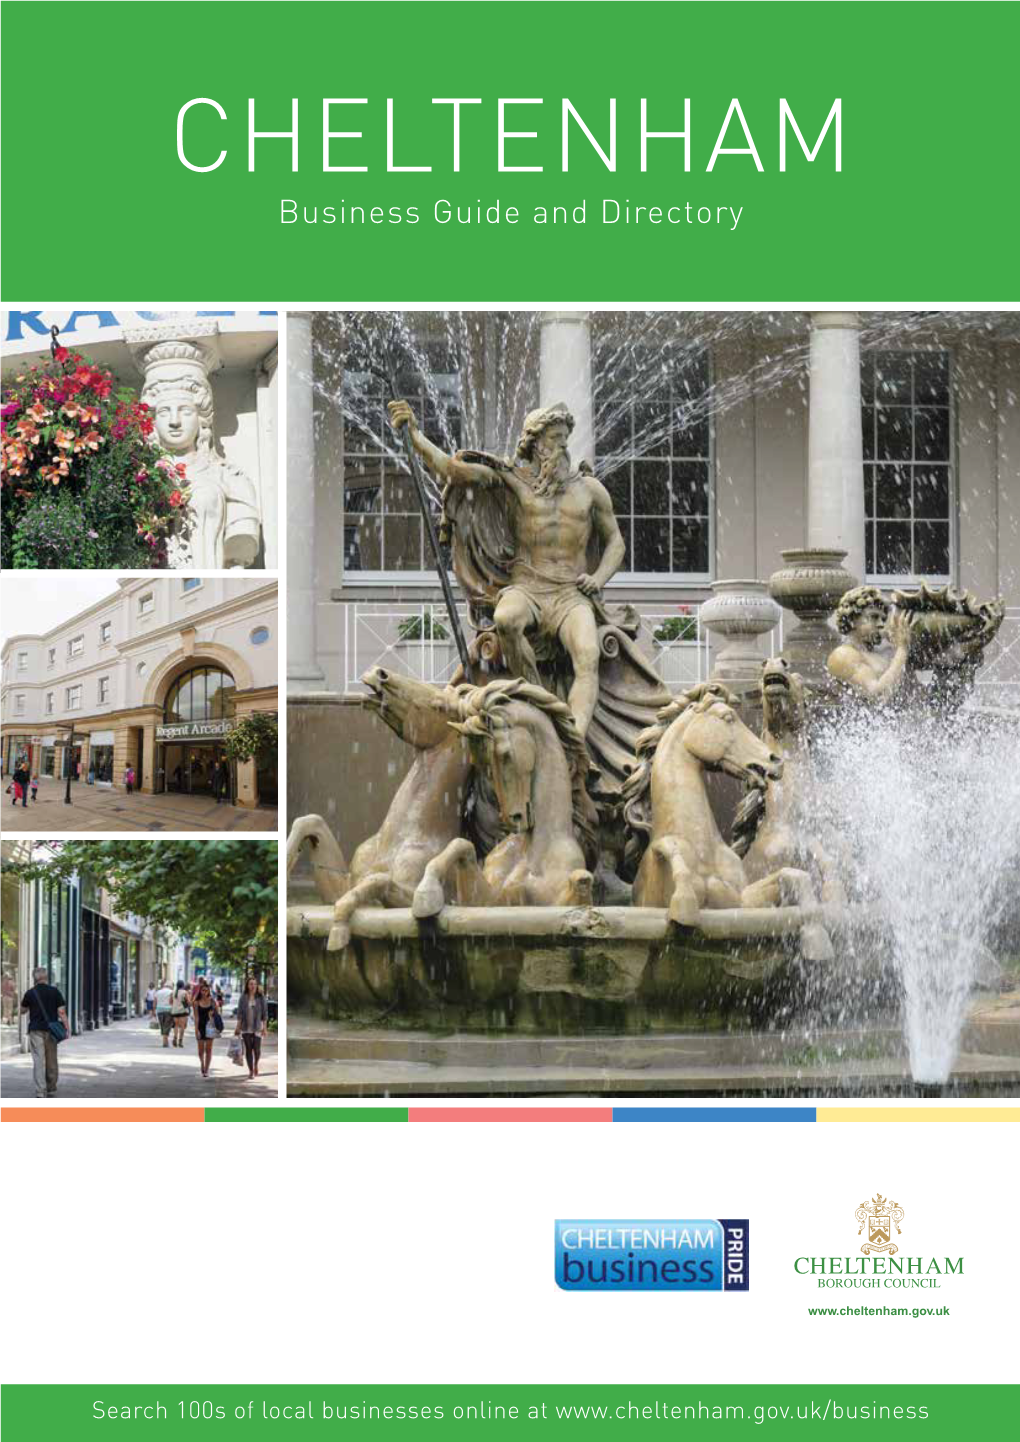 CHELTENHAM Business Guide and Directory